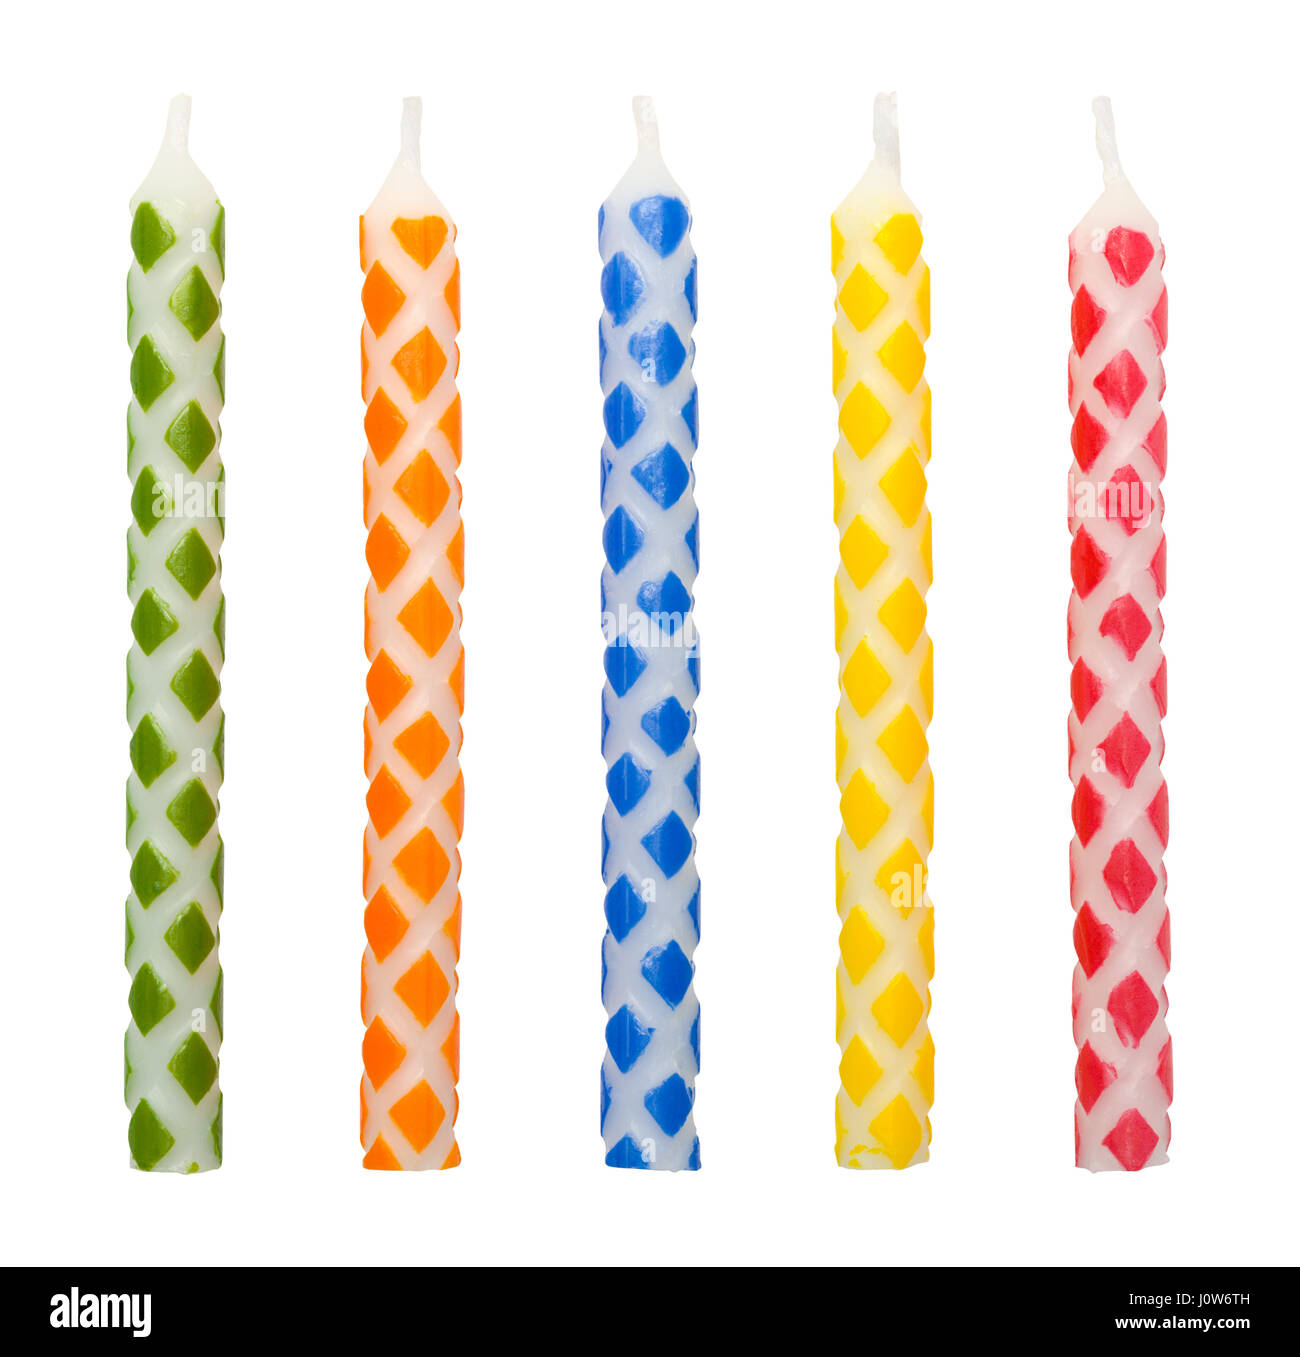 Five Checkered Cut Wax Birthday Candles Cut Out. Stock Photo